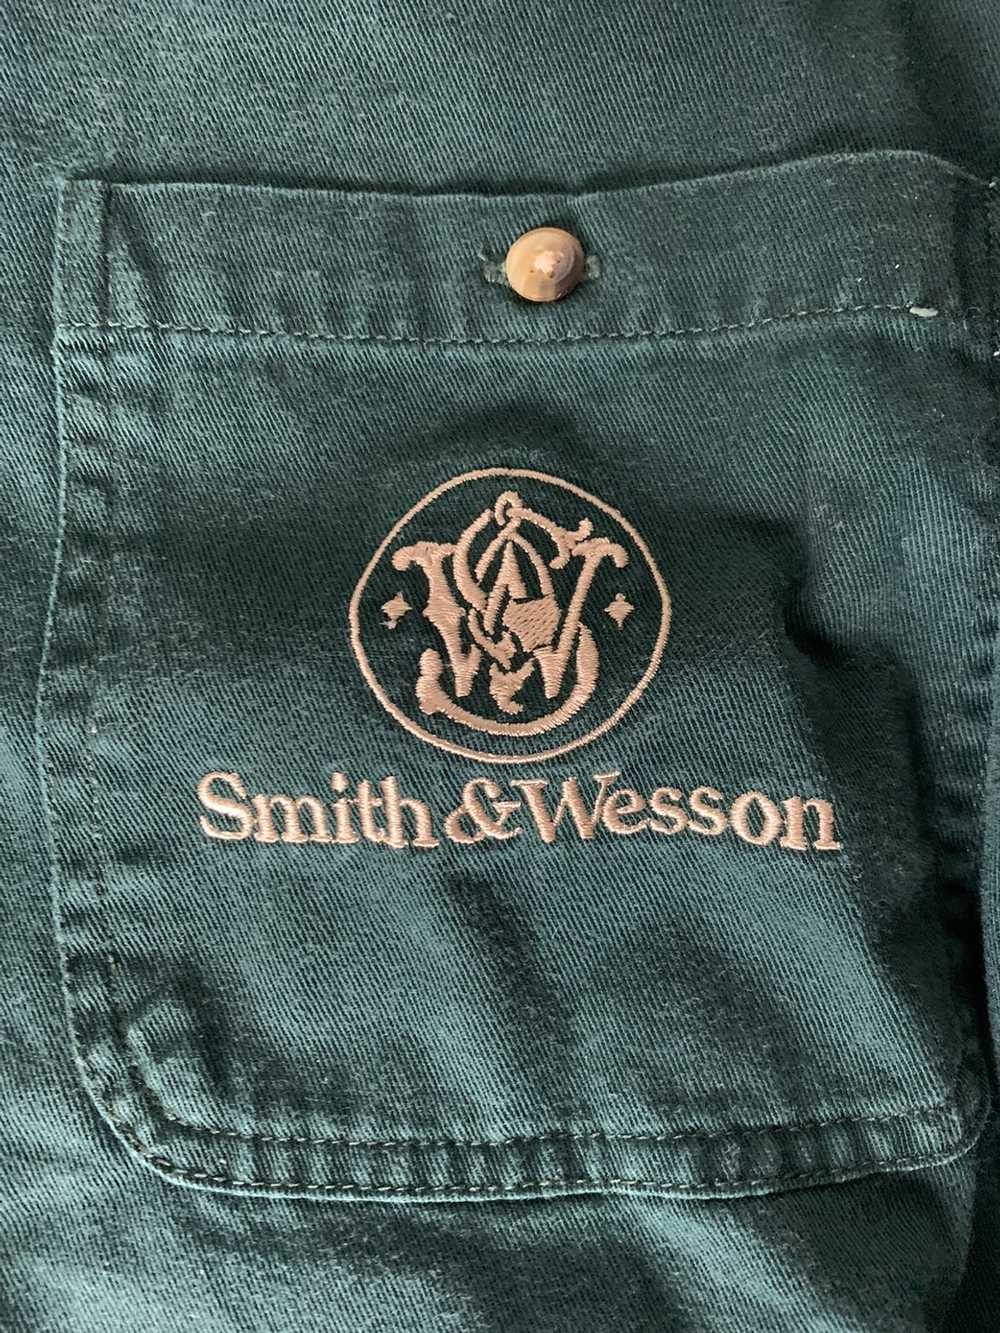 Vintage Vintage Smith & Wesson Button-Up - image 4